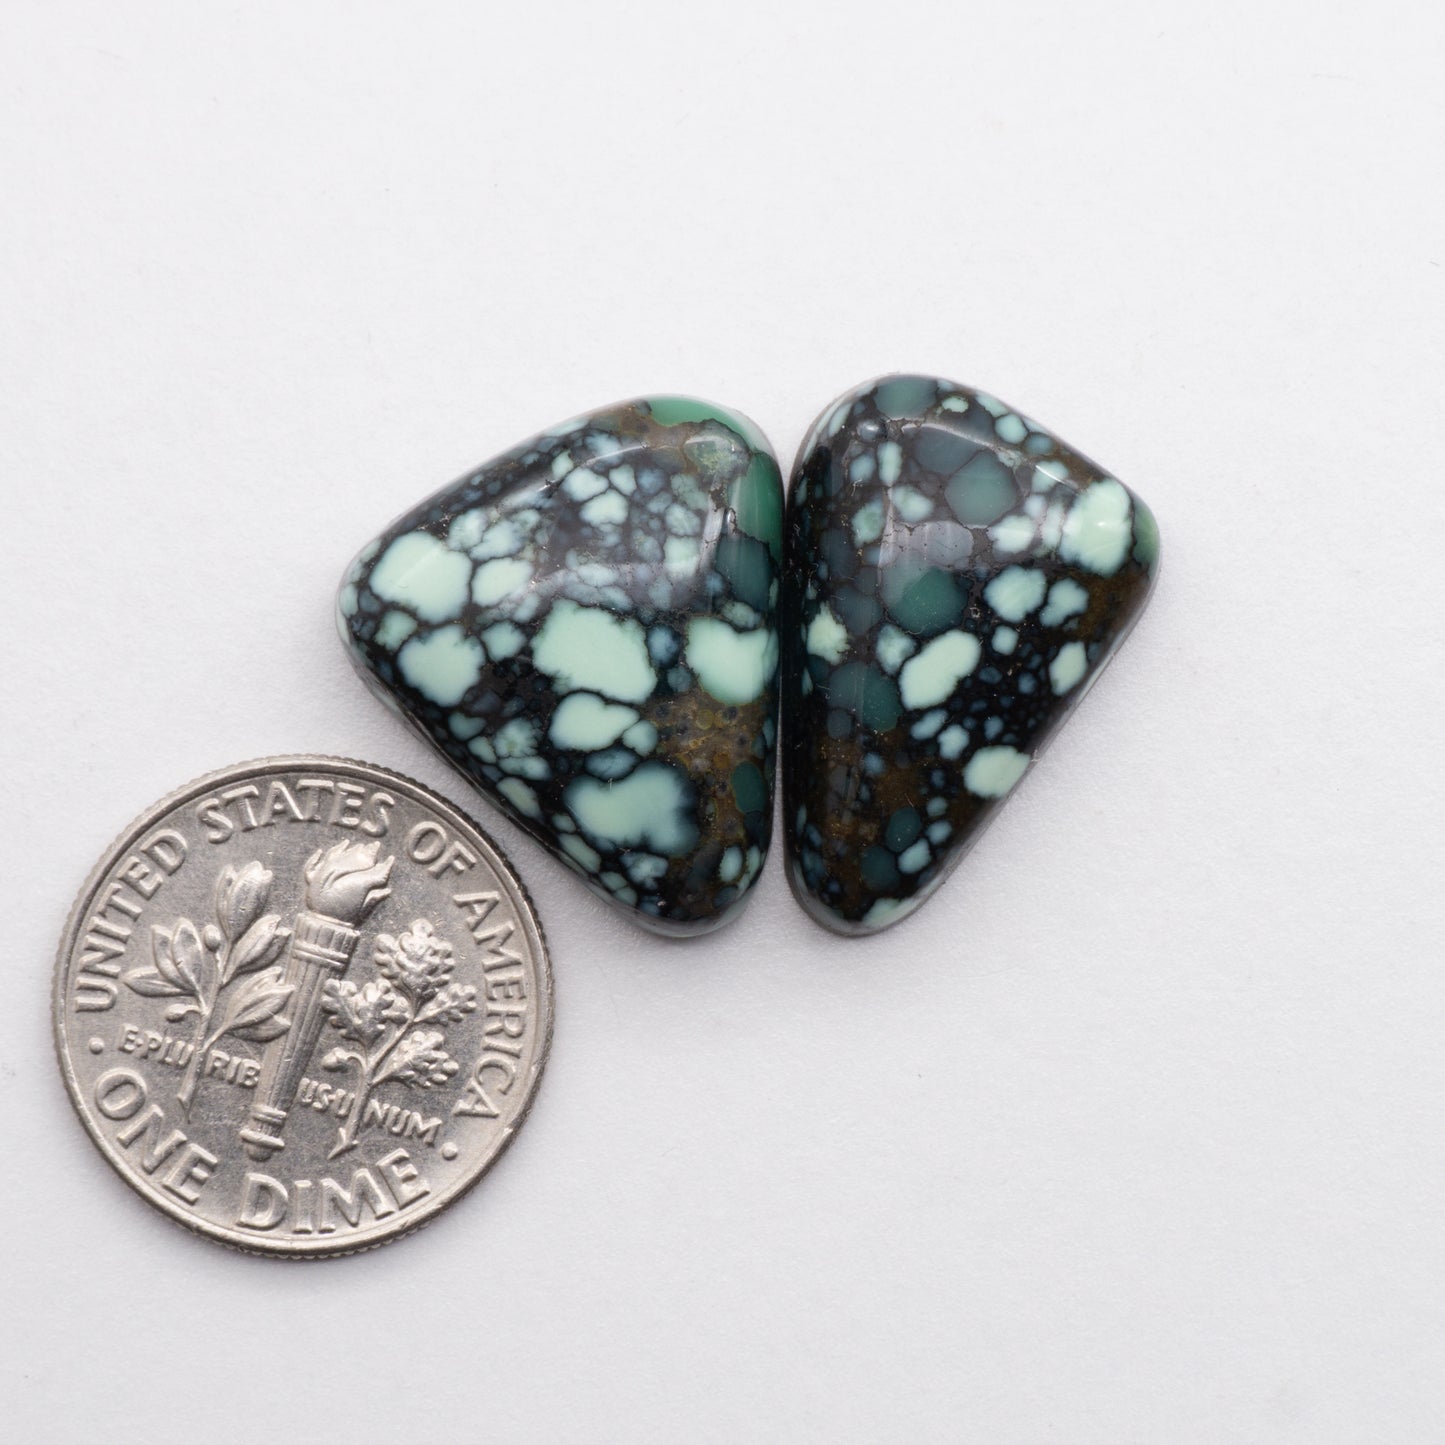 This Nevada Variscite Cabochon lot has a glossy finish and is backed for added strength. Mined in Nevada, USA. Similar to turquoise, used for jewelry making.